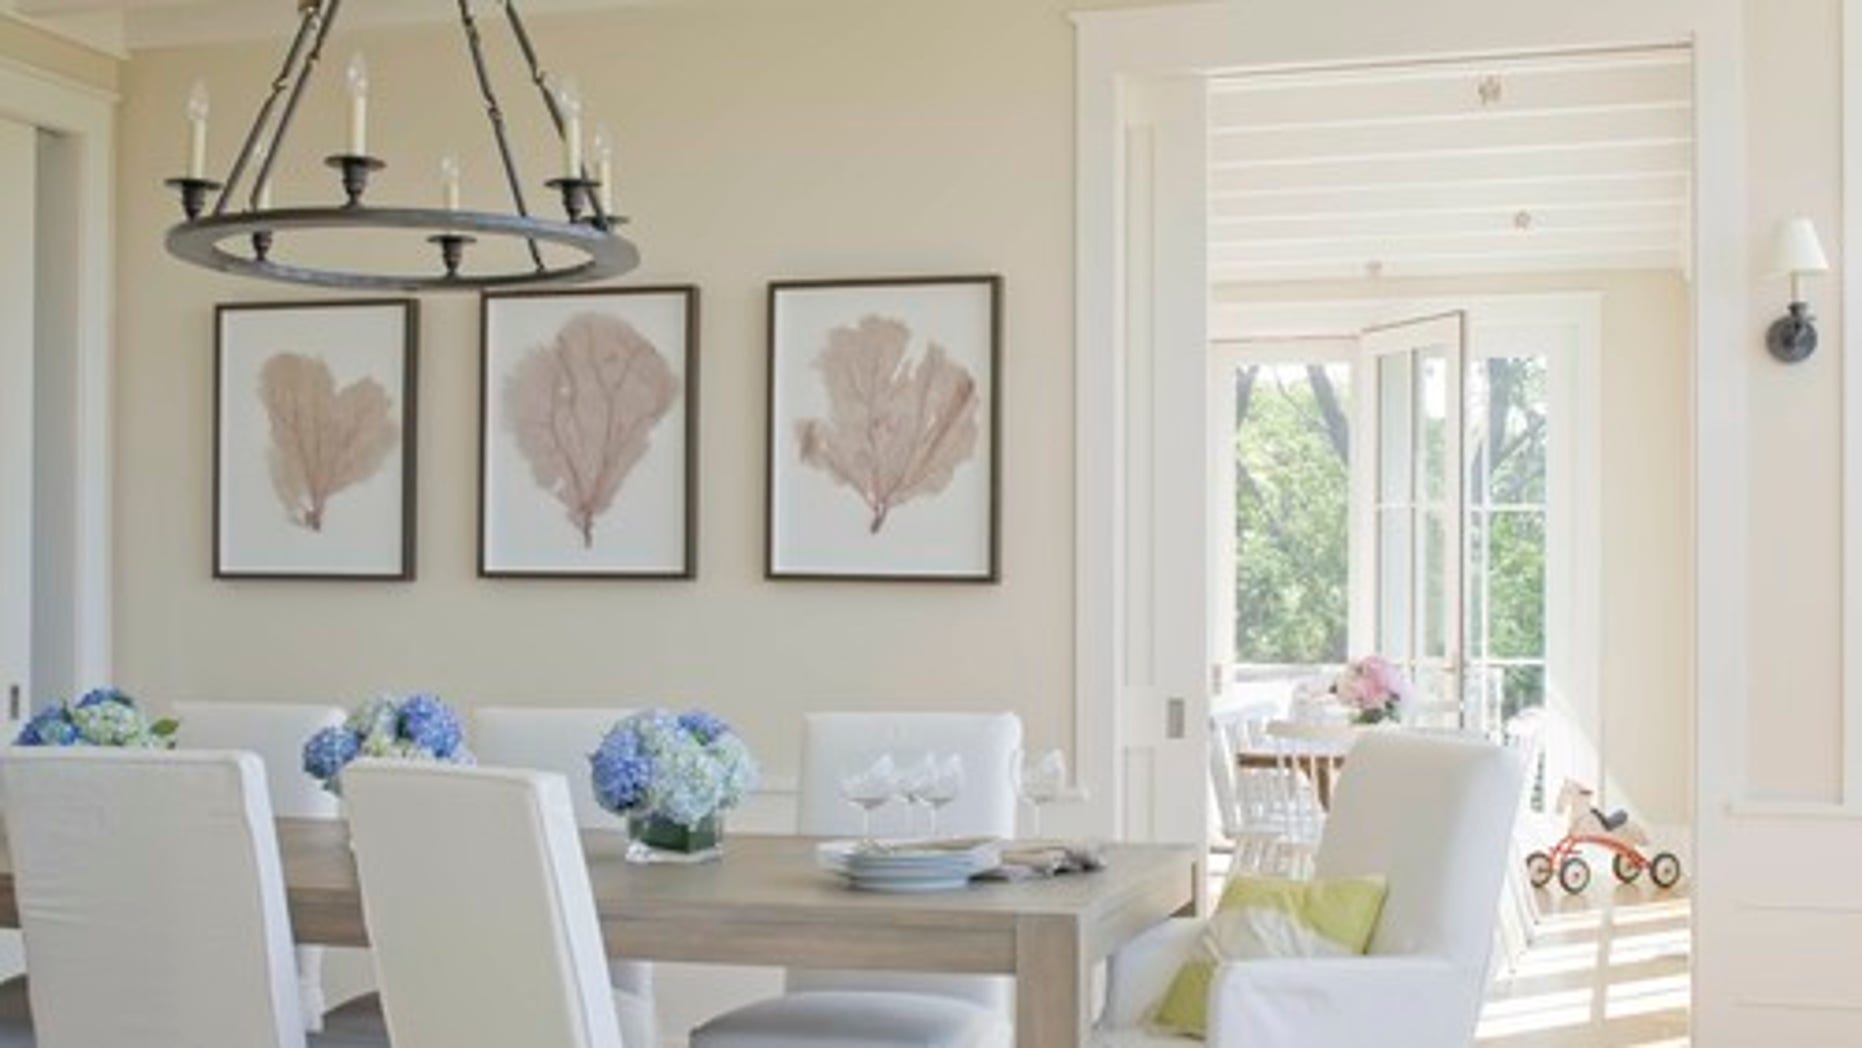 Staged Dining Room Photos